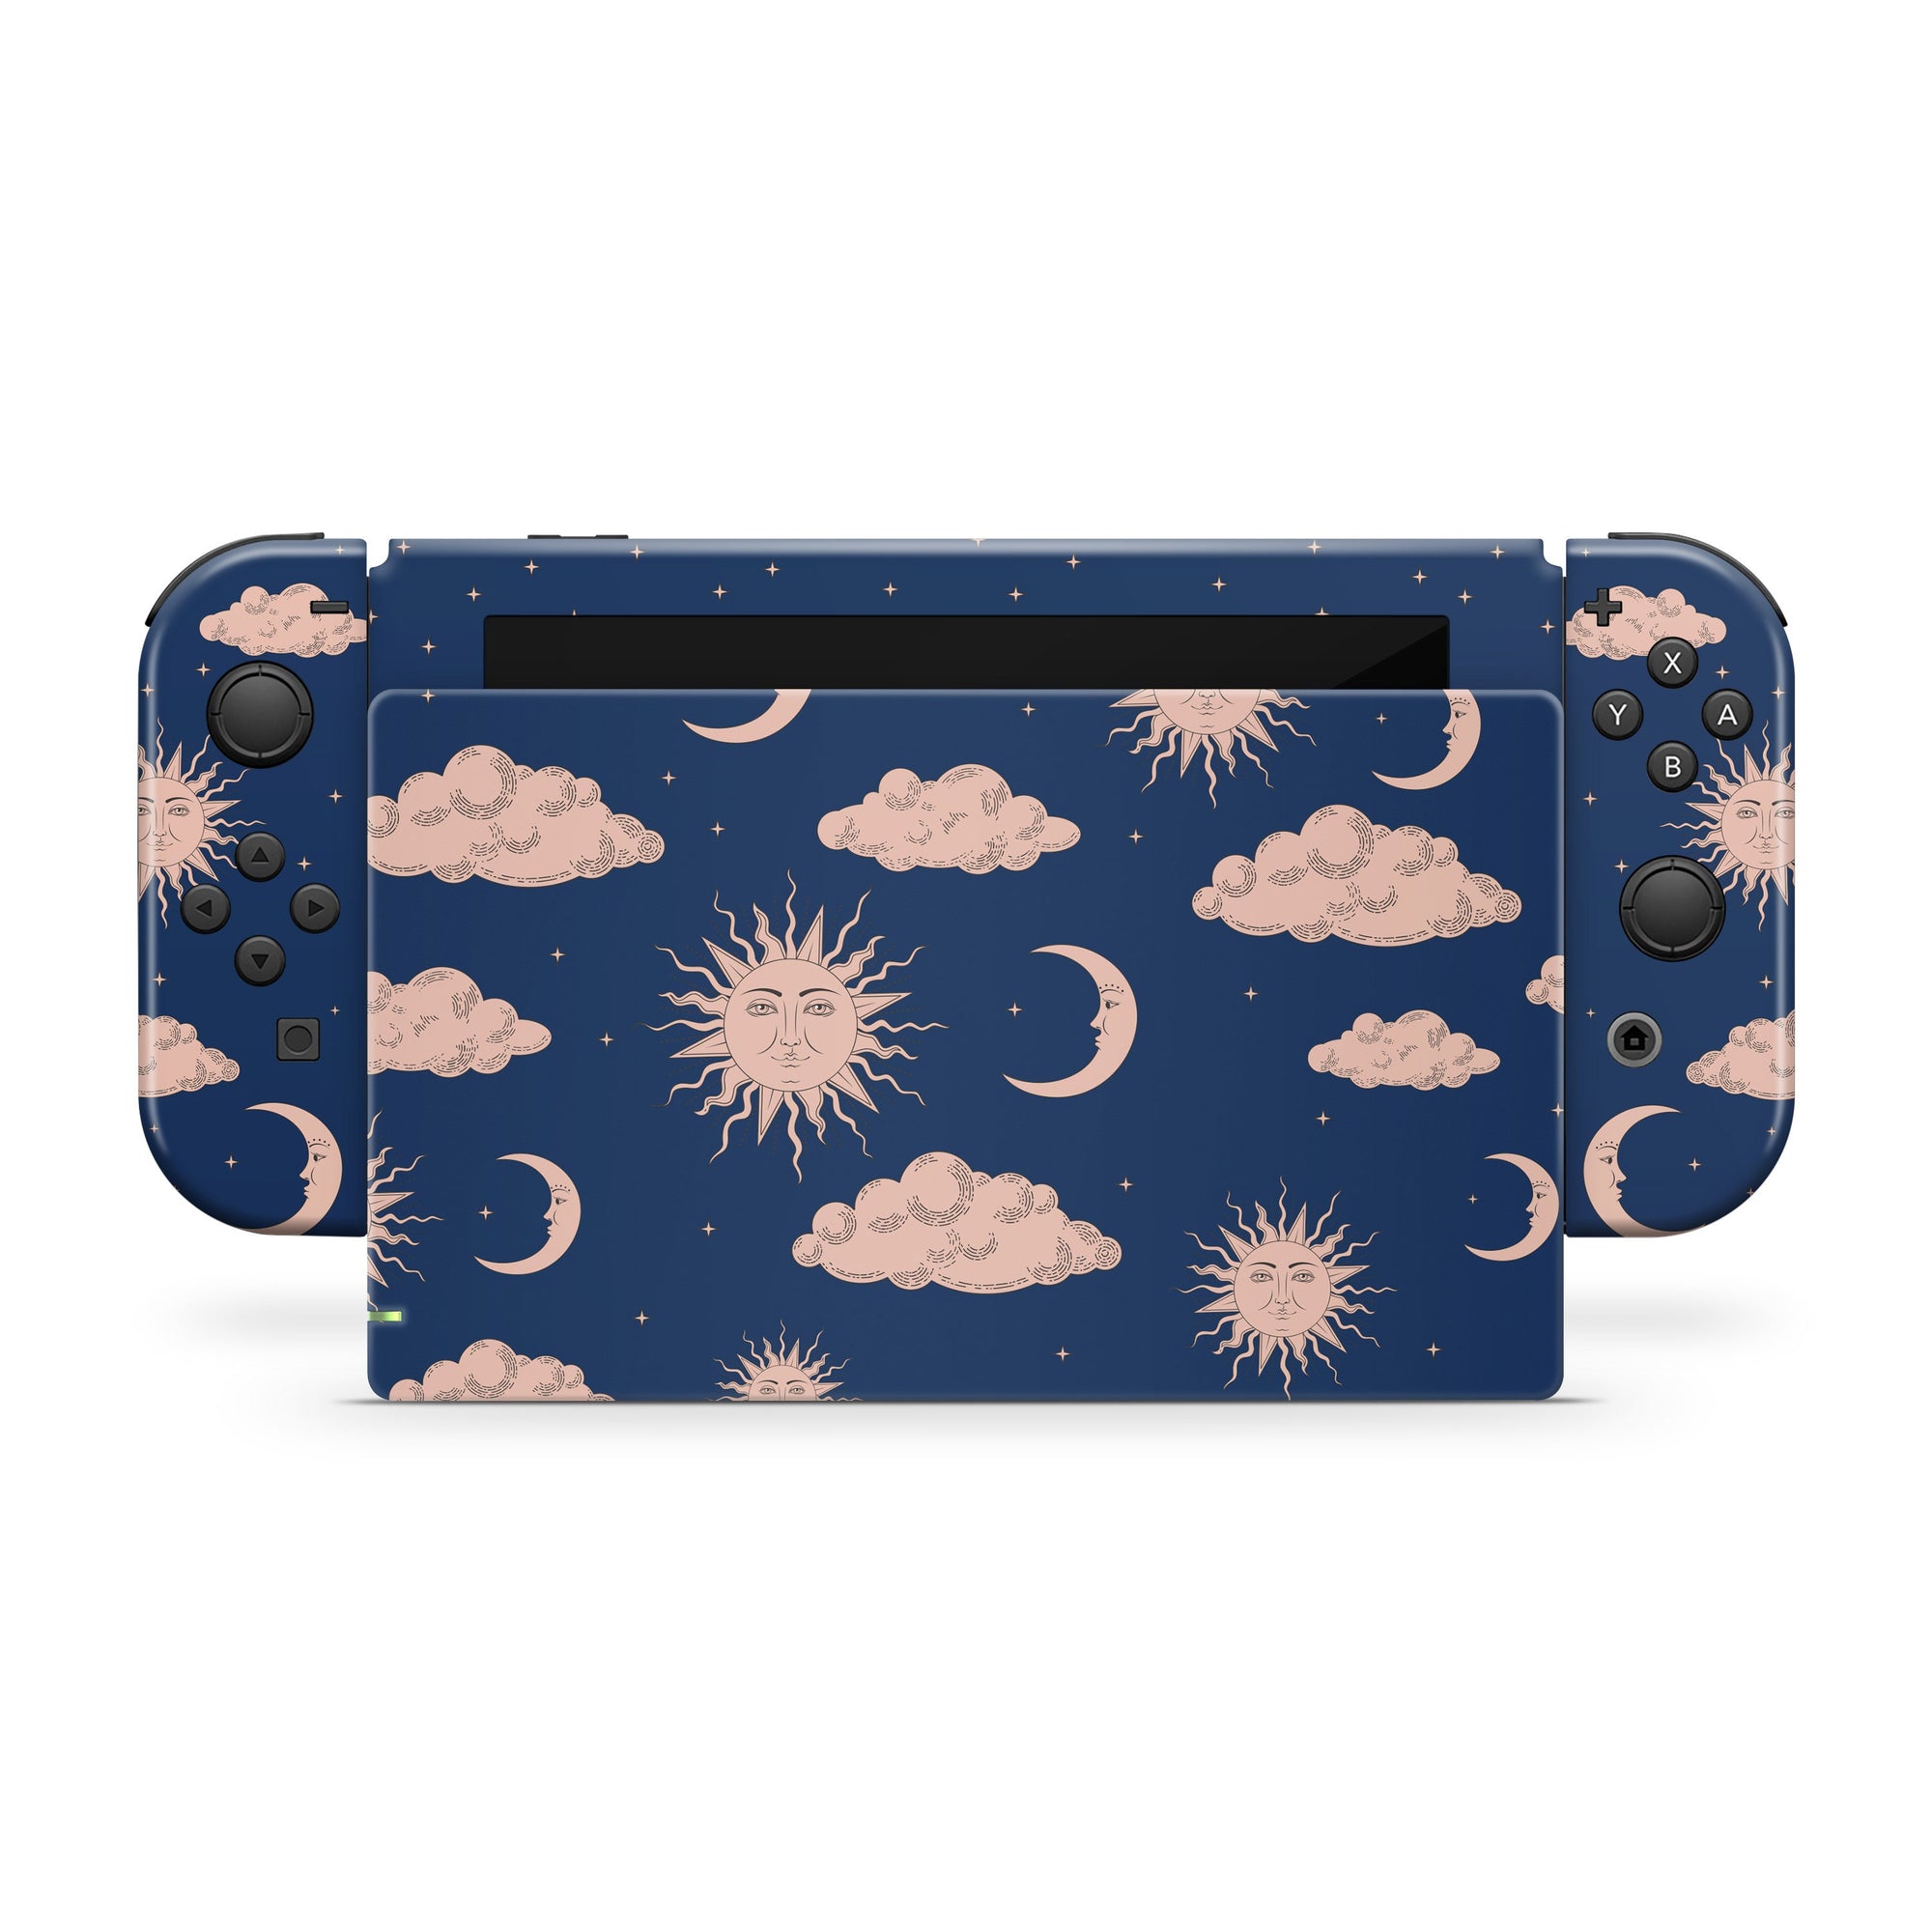 Blue Nintendo switches skin Clouds, moon and sun switch skin, Premium vinyl 3m Decal sticker Full wrap cover